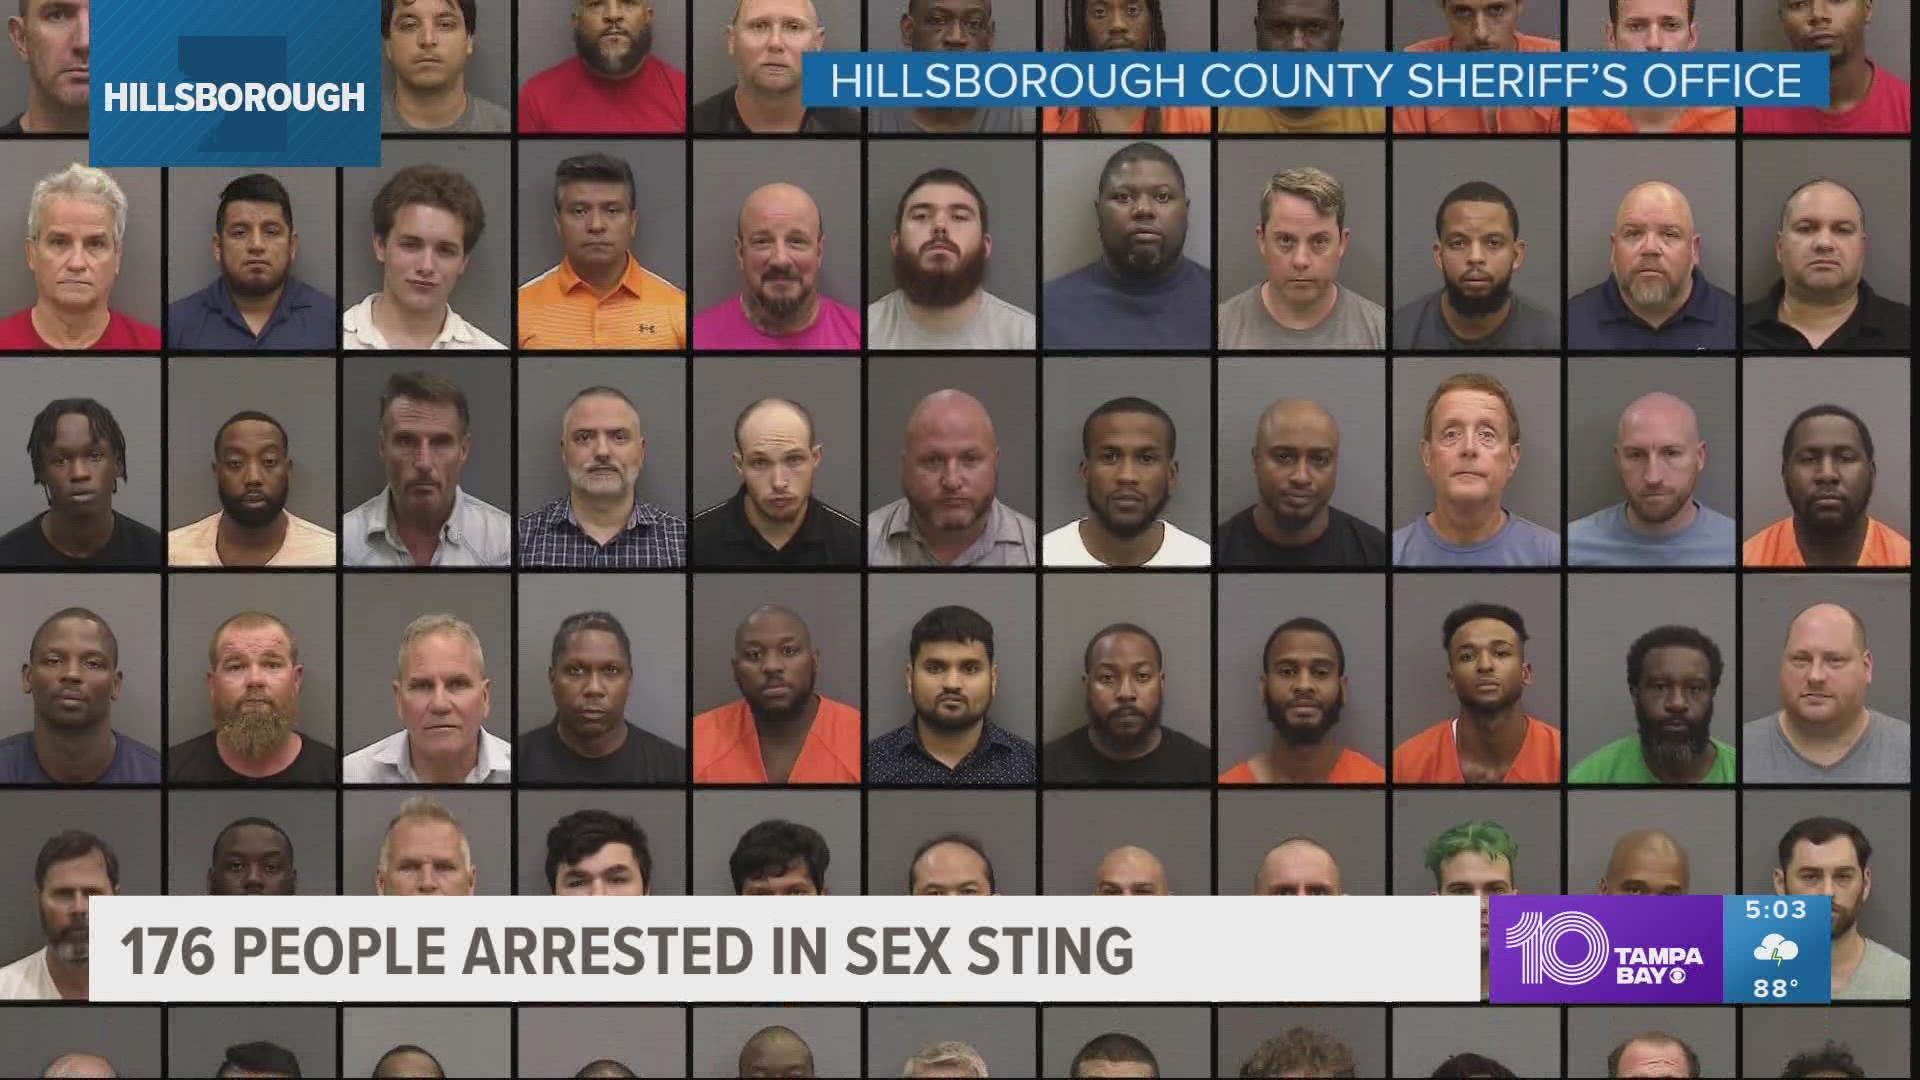 Of the 176 men arrested, four face human trafficking charges, according to the sheriff's office.